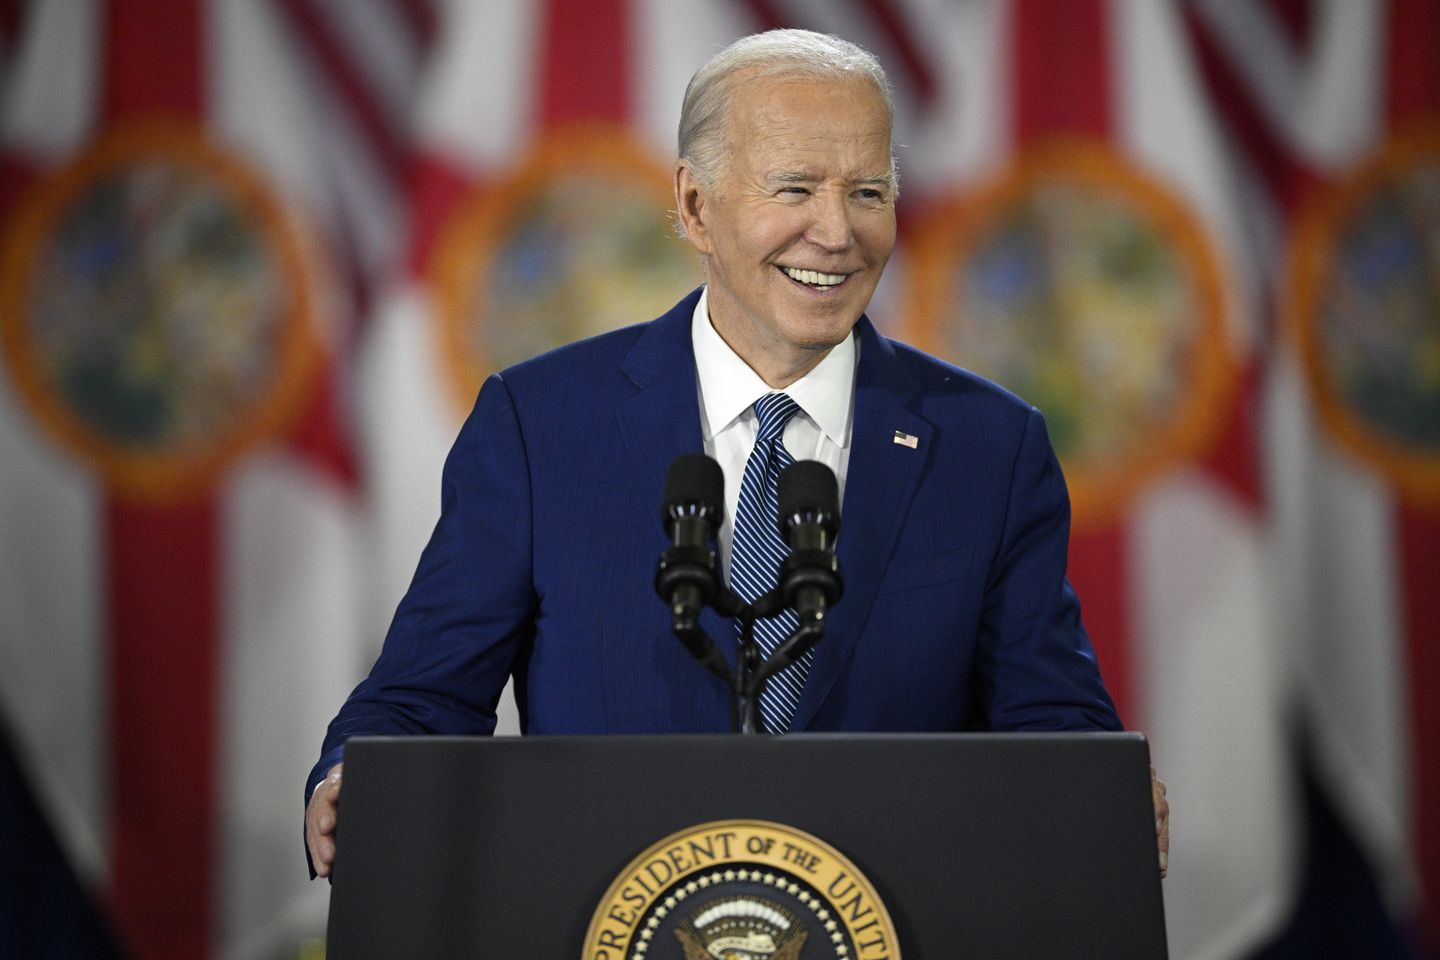 Biden accused of mocking Catholicism for making sign of cross during abortion rally
